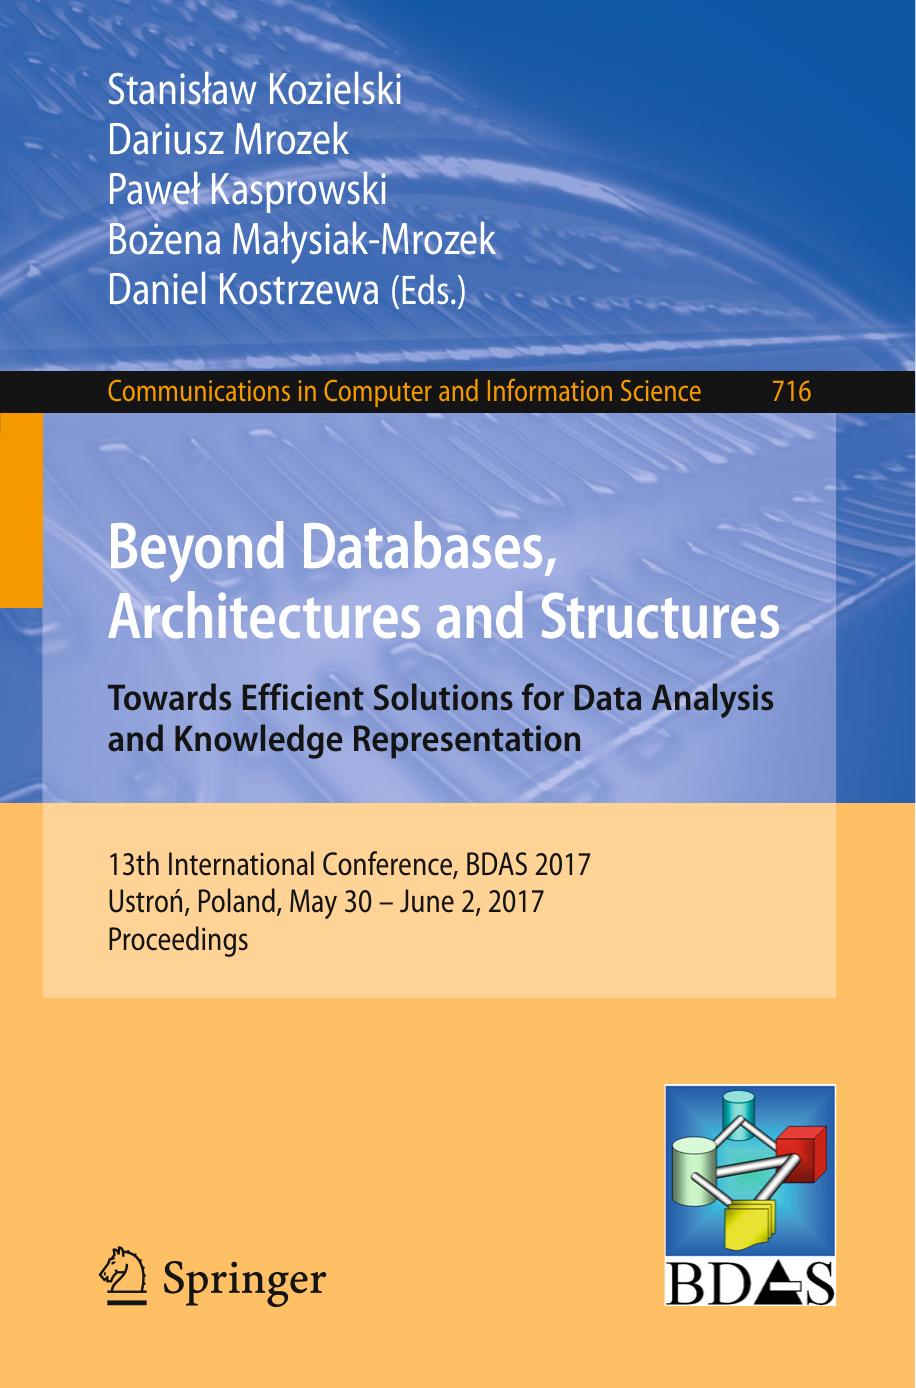 Beyond Databases, Architectures and Structures. Towards Efficient Solutions for Data Analysis and Knowledge Representation: 13th International Conference, BDAS 2017, Ustroń, Poland, May 30 - June 2, 2017, Proceedings